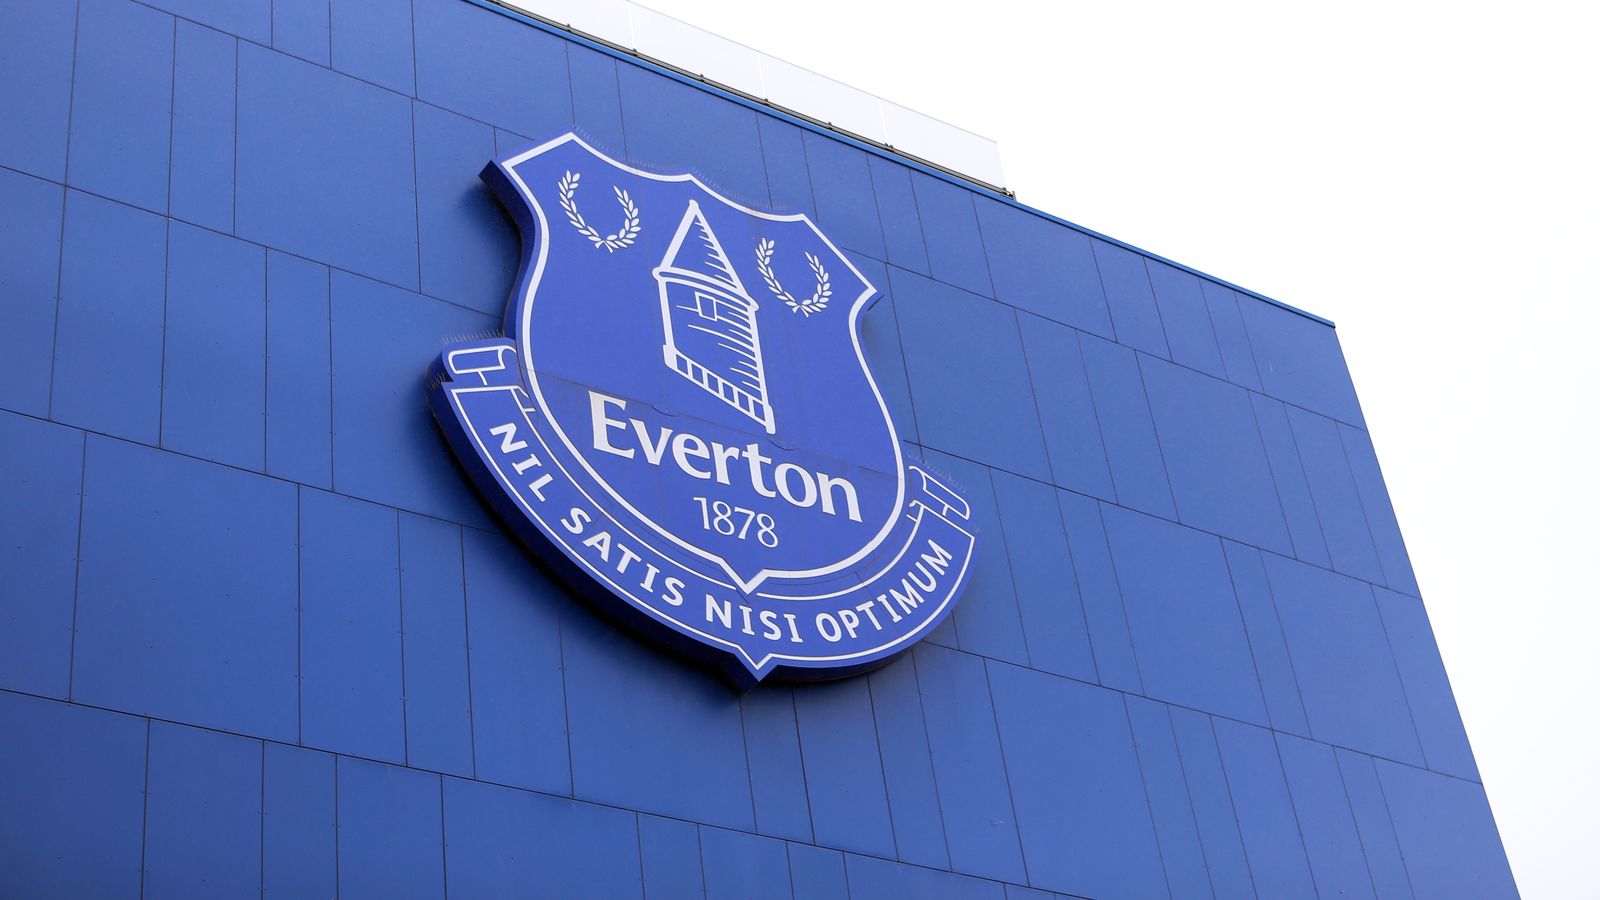 Everton docked two points for further breach of Premier League profit and sustainability rules